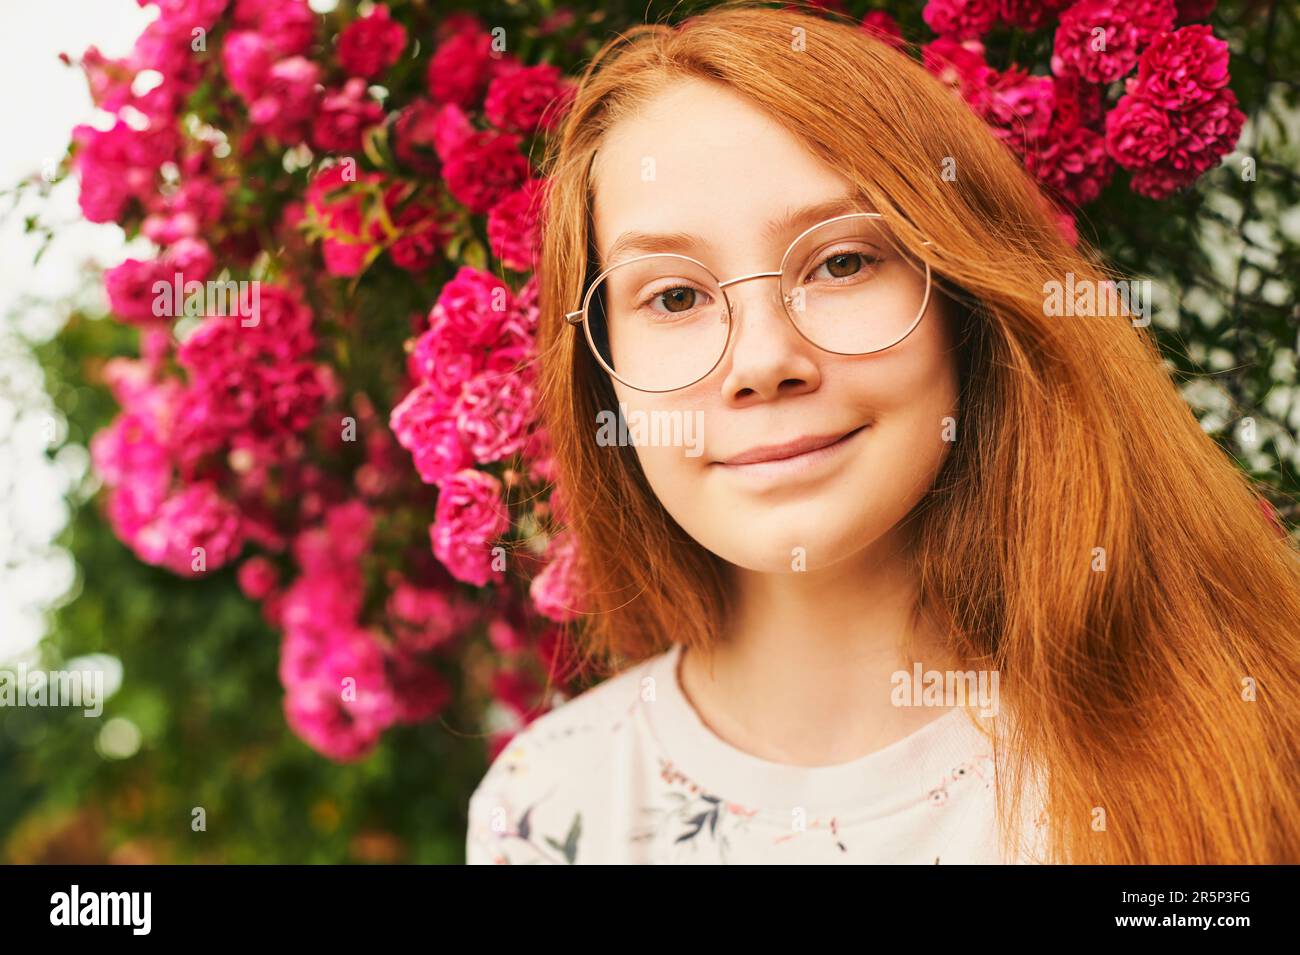 Outdoor close up portrait of happy young girl, wearing eyeglasses, posing in flower garden Stock Photo